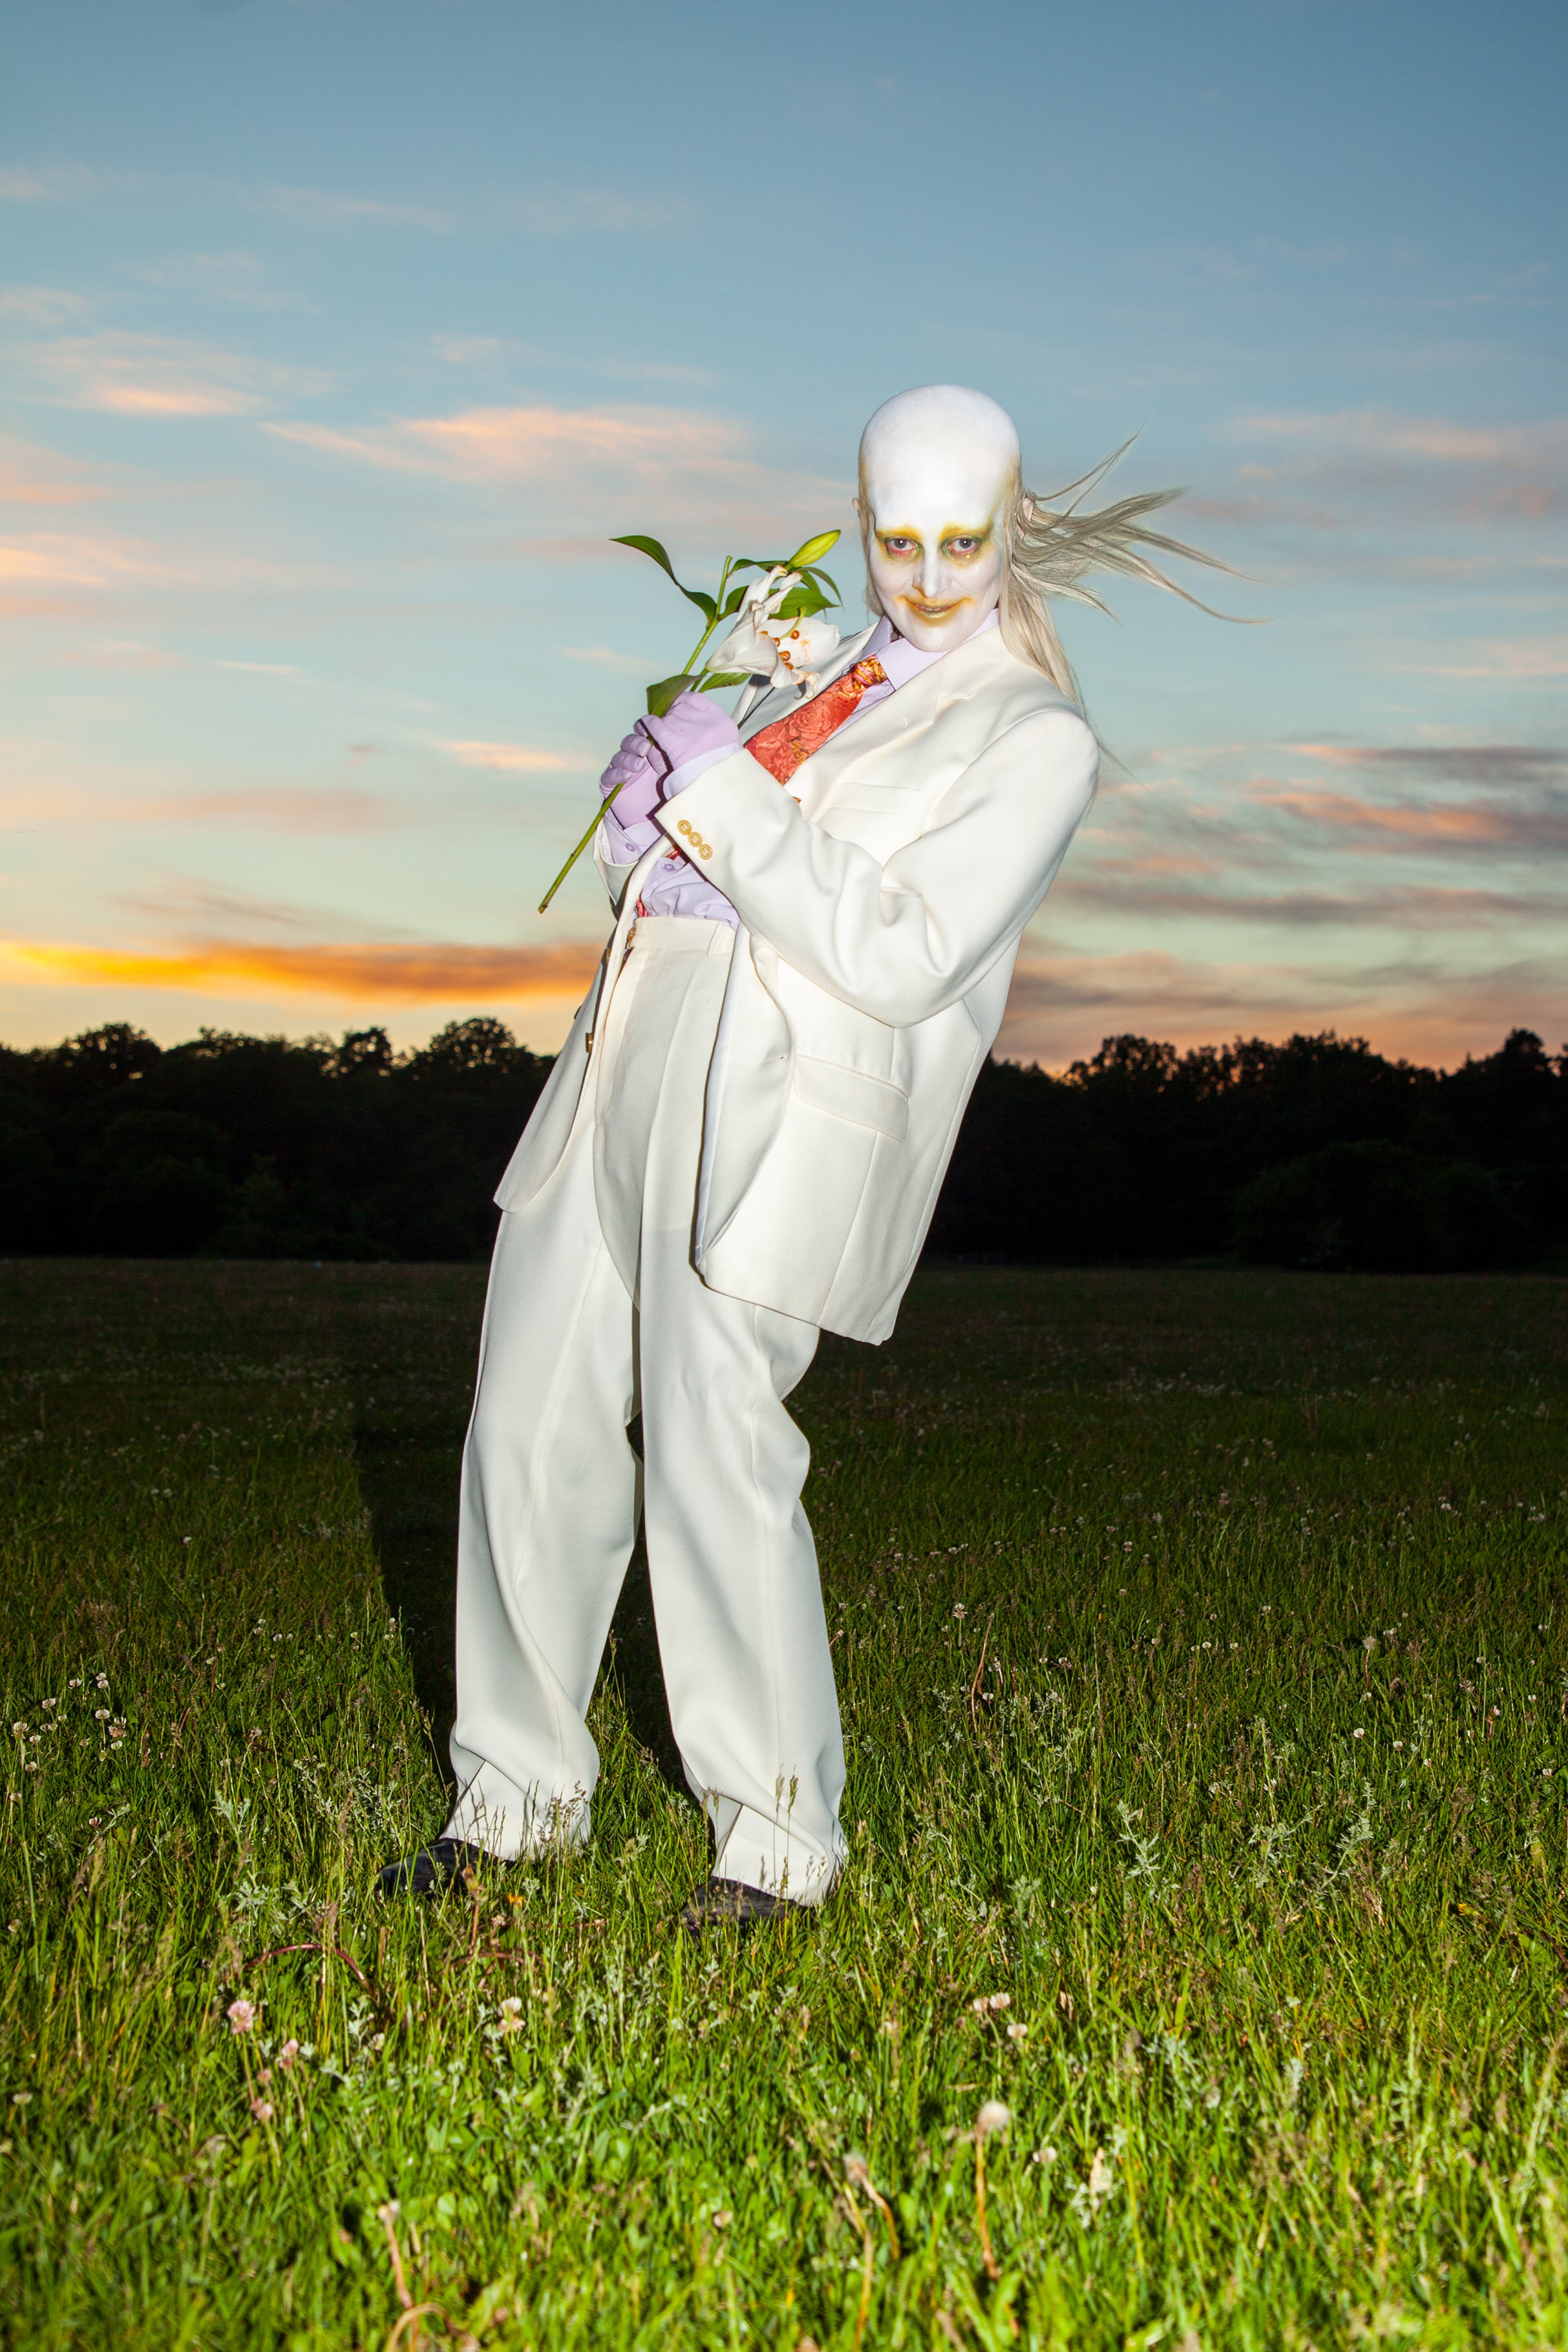 Fever Ray in Oakland promo photo for APE presale offer code